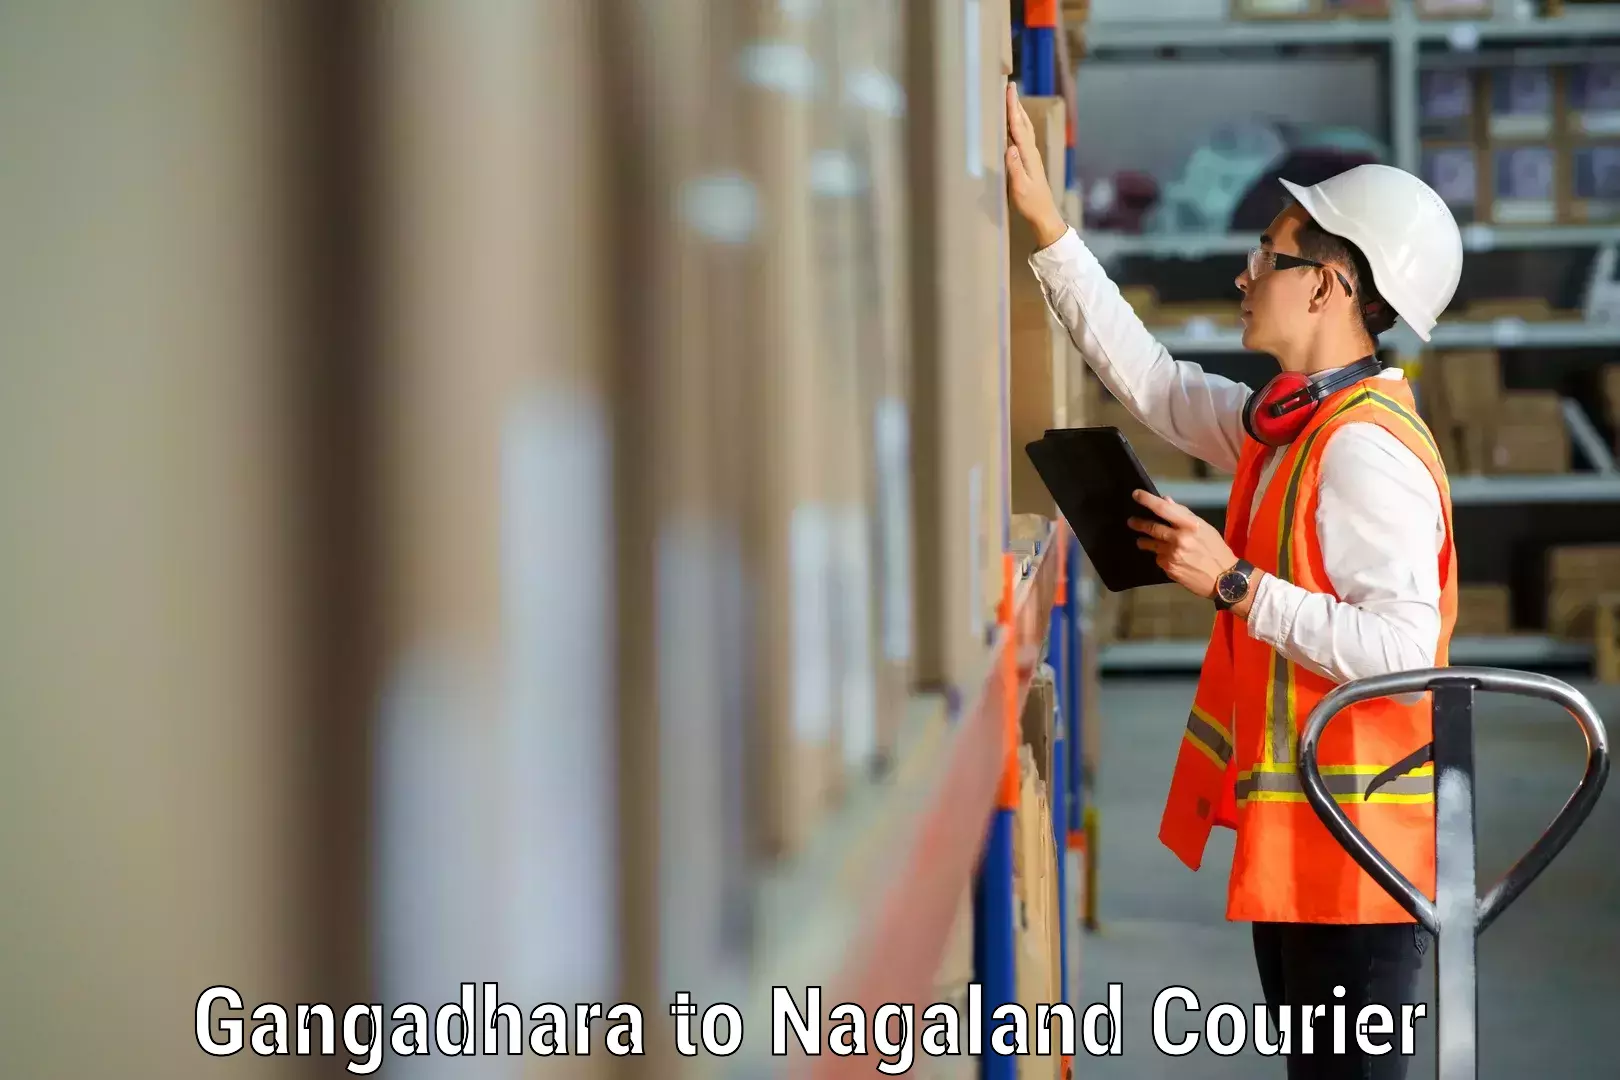 Quality relocation assistance in Gangadhara to Nagaland